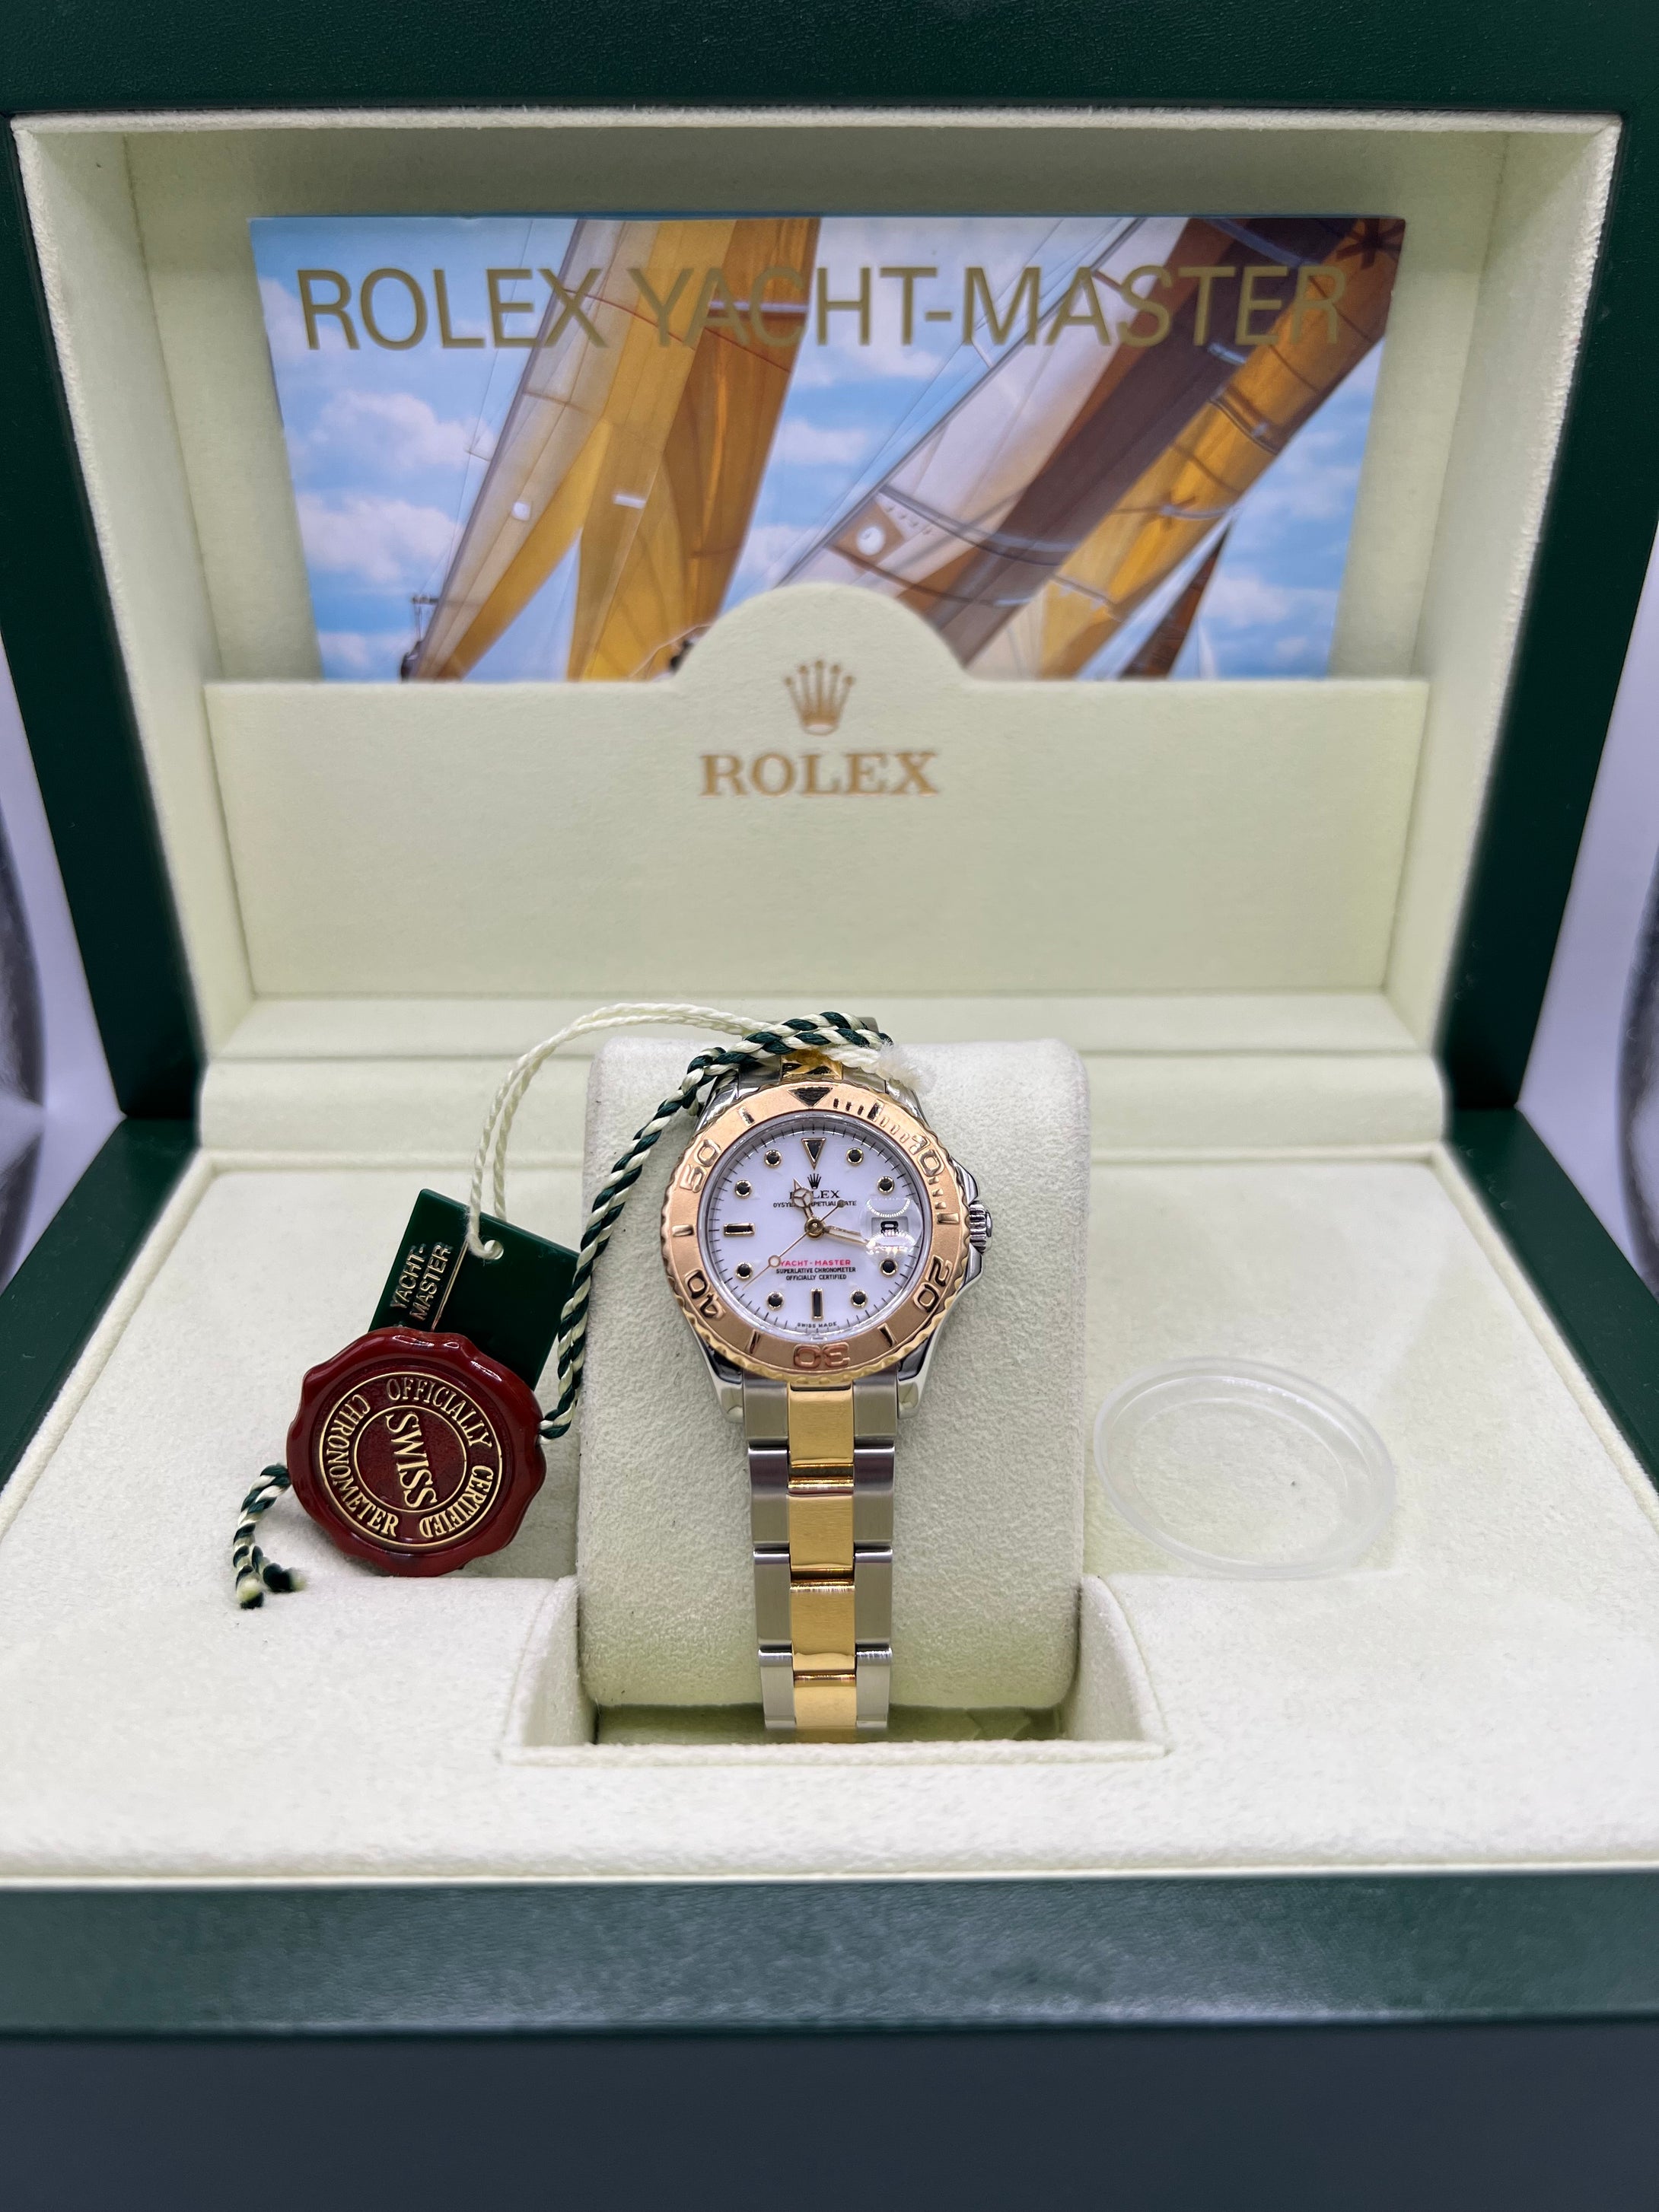 29mm Rolex YACHT-MASTER Model 169623 in Steel and 18-Carat Gold